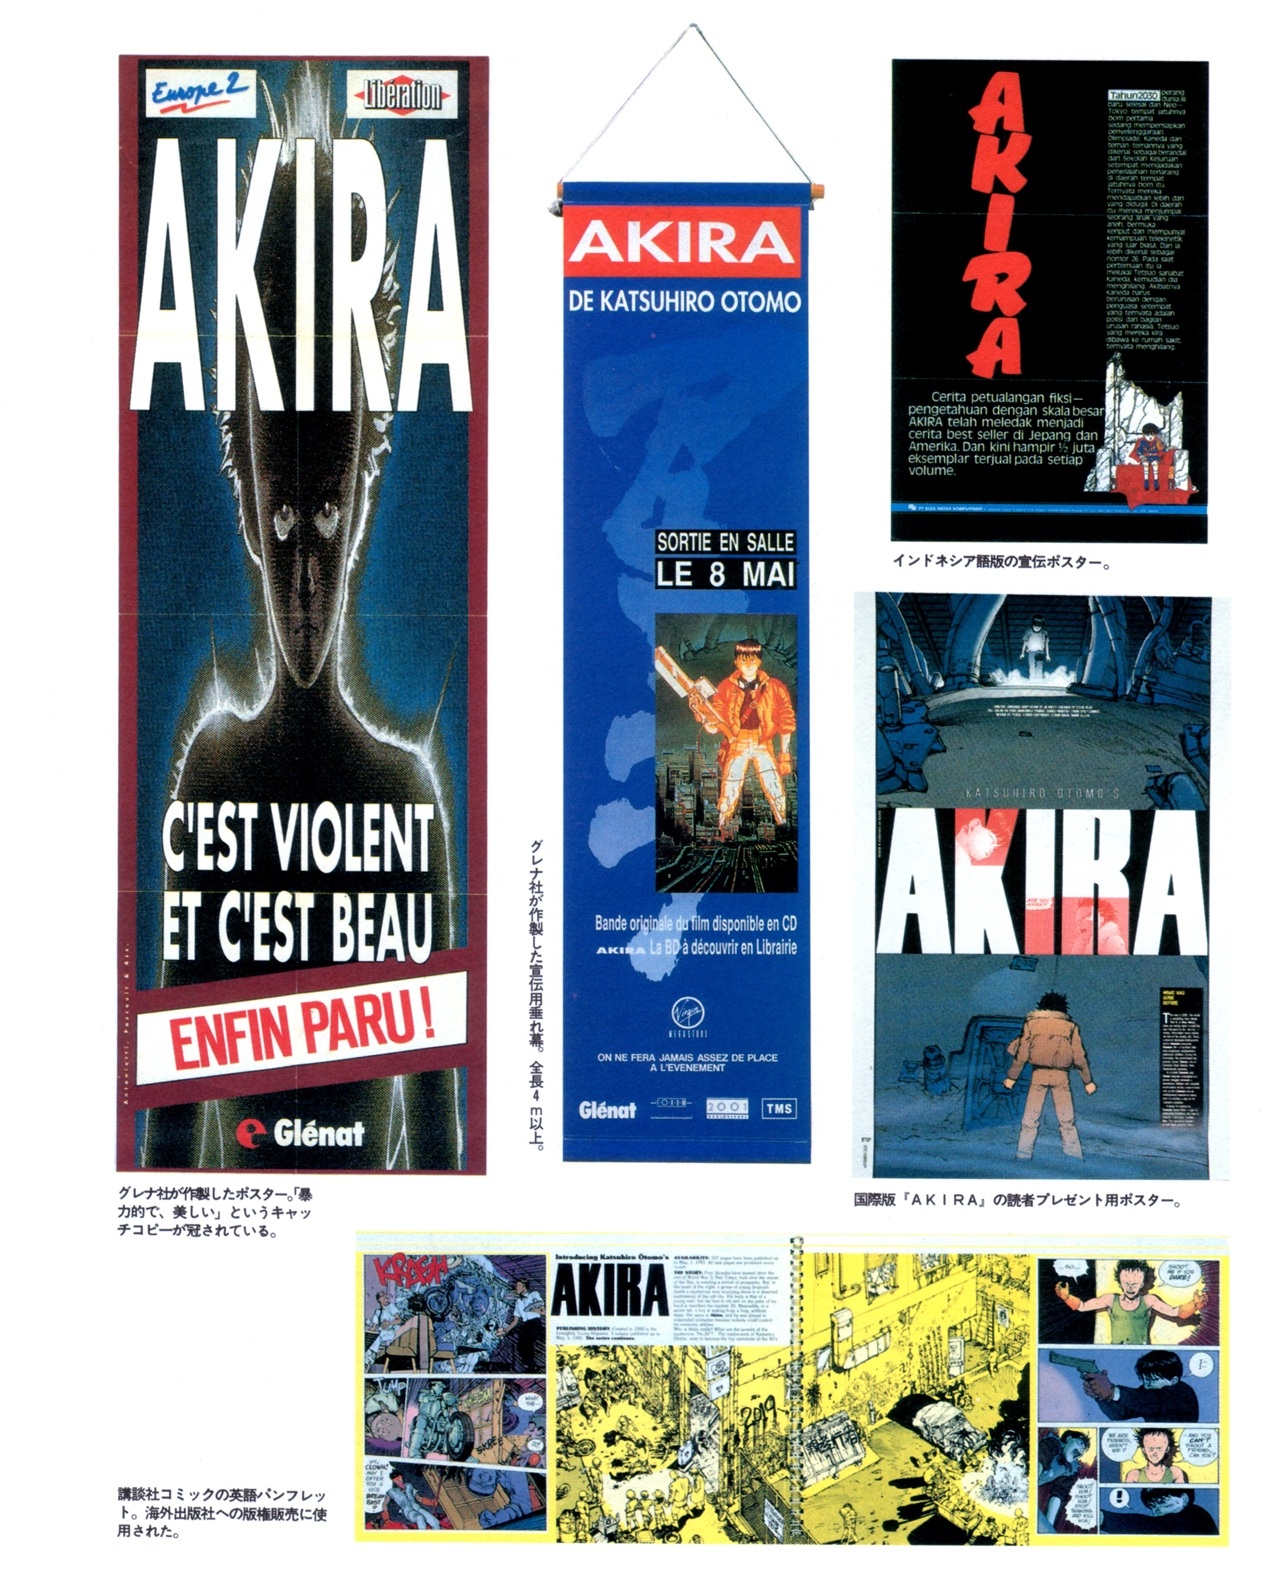 Akira club - The memory of Akira lives on in our hearts! 211